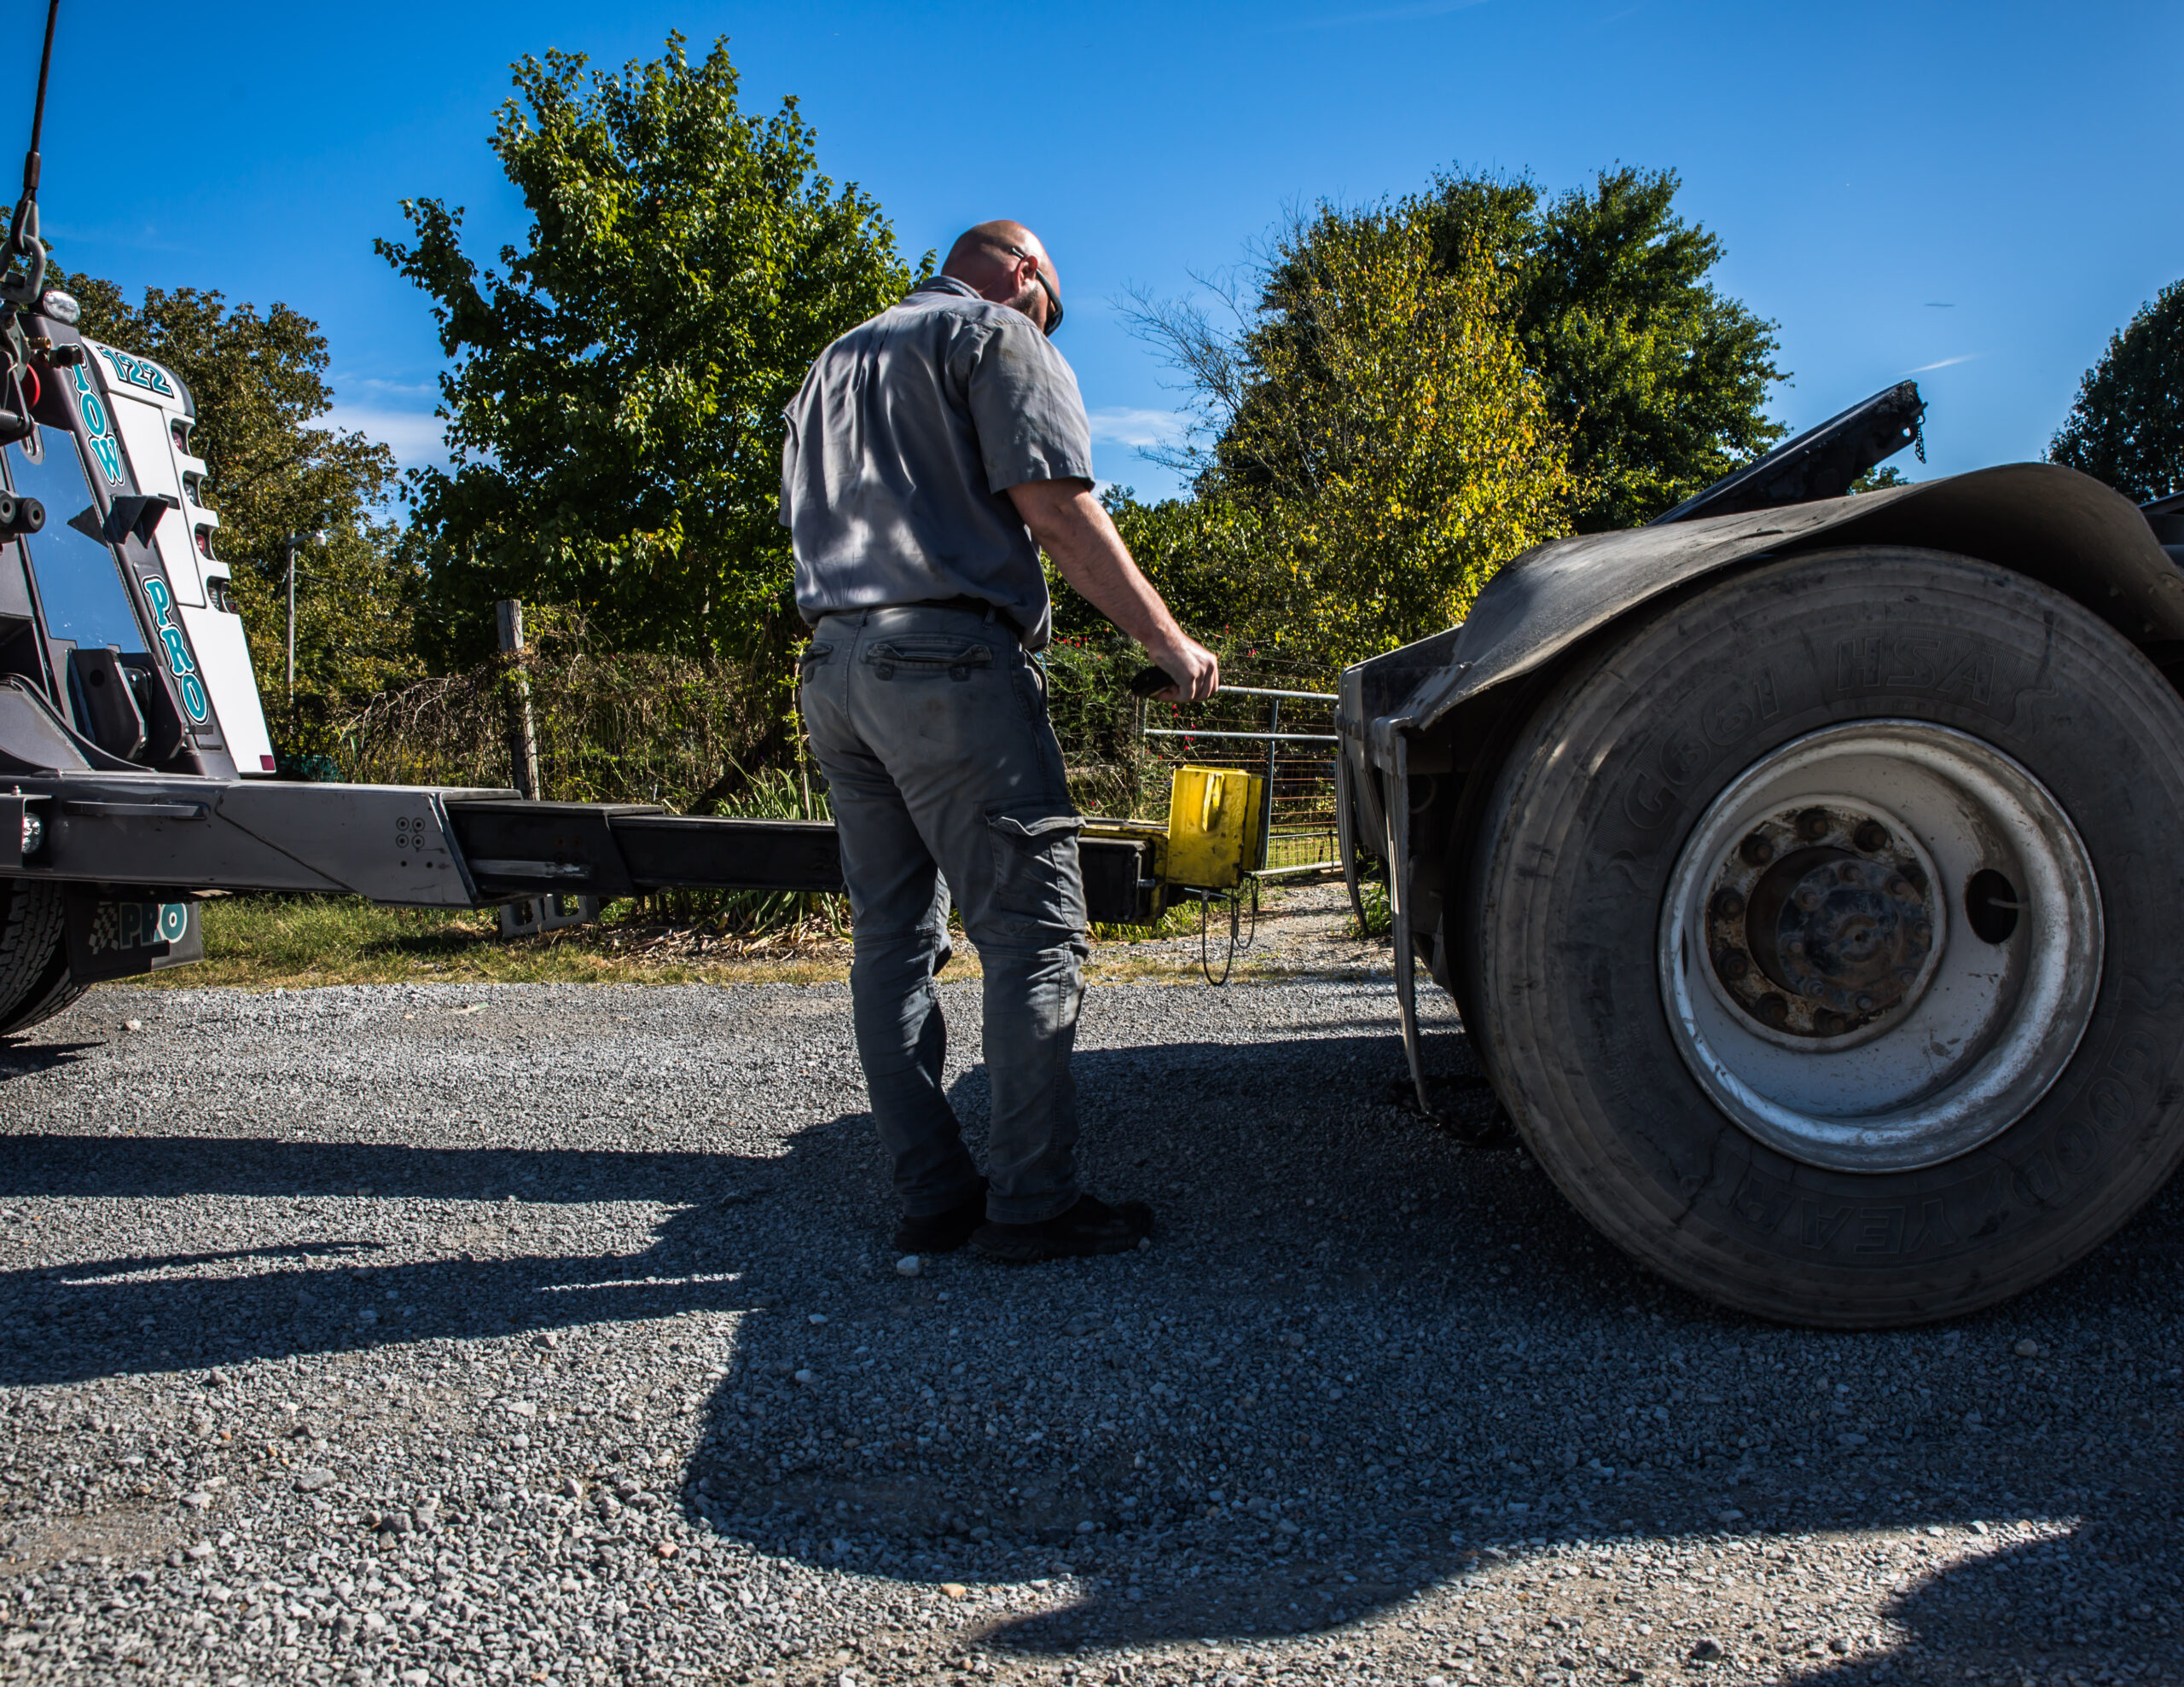 A tow pro truck driver on a clear sunny day, prepping a heavy duty vehicle to be ready for a tow.